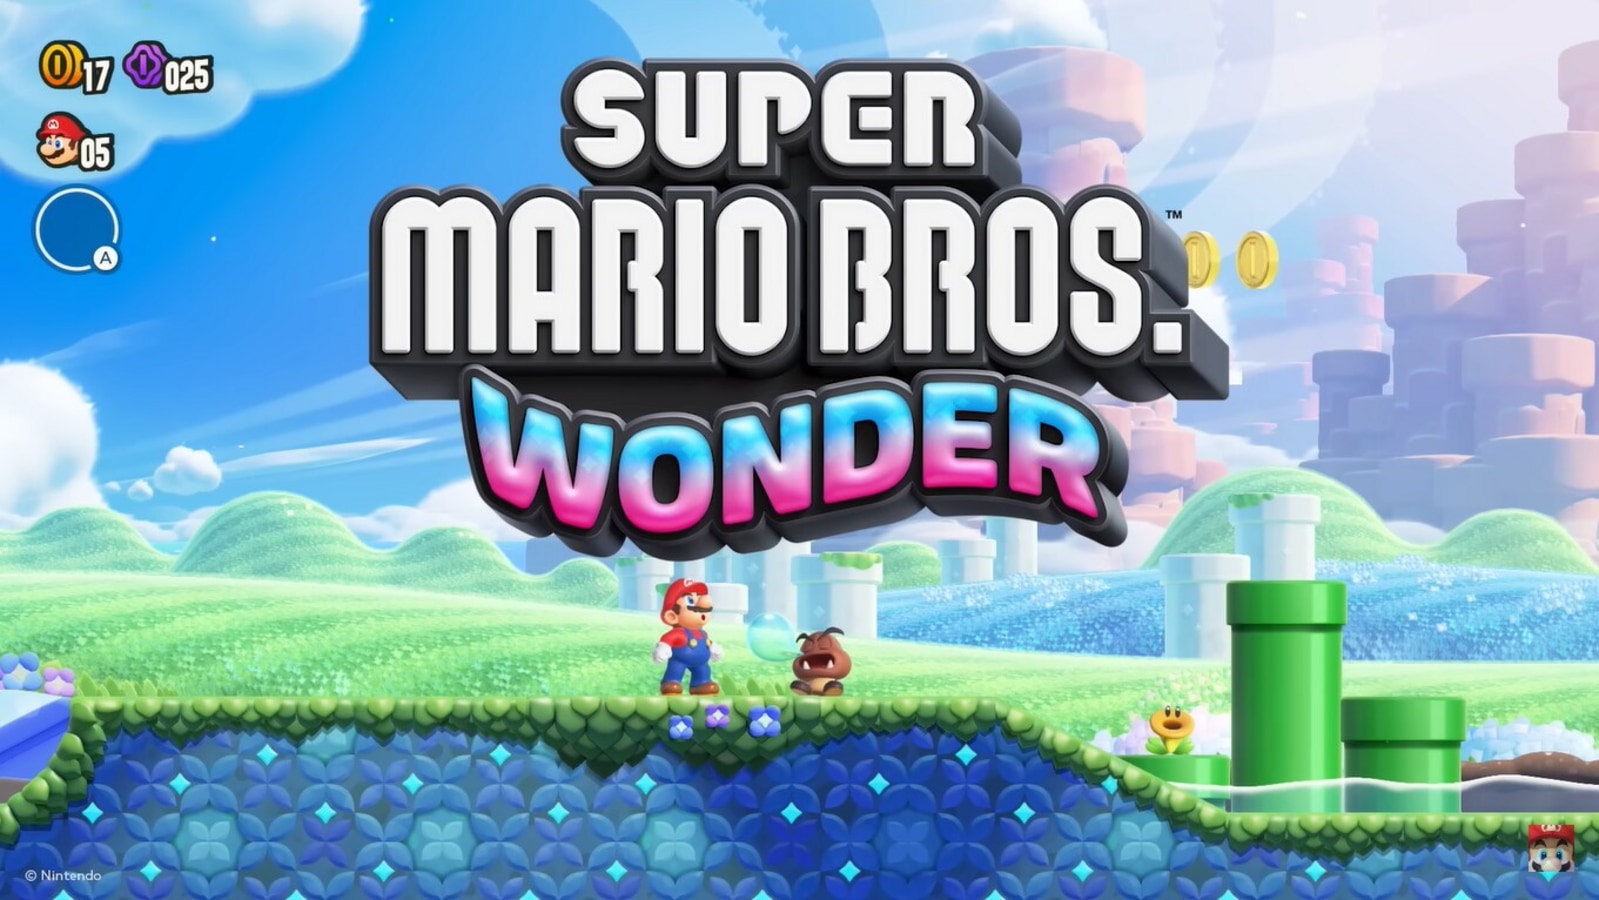 Super Mario Bros. Wonder: Know all about it - Release date, gameplay,  price, and more